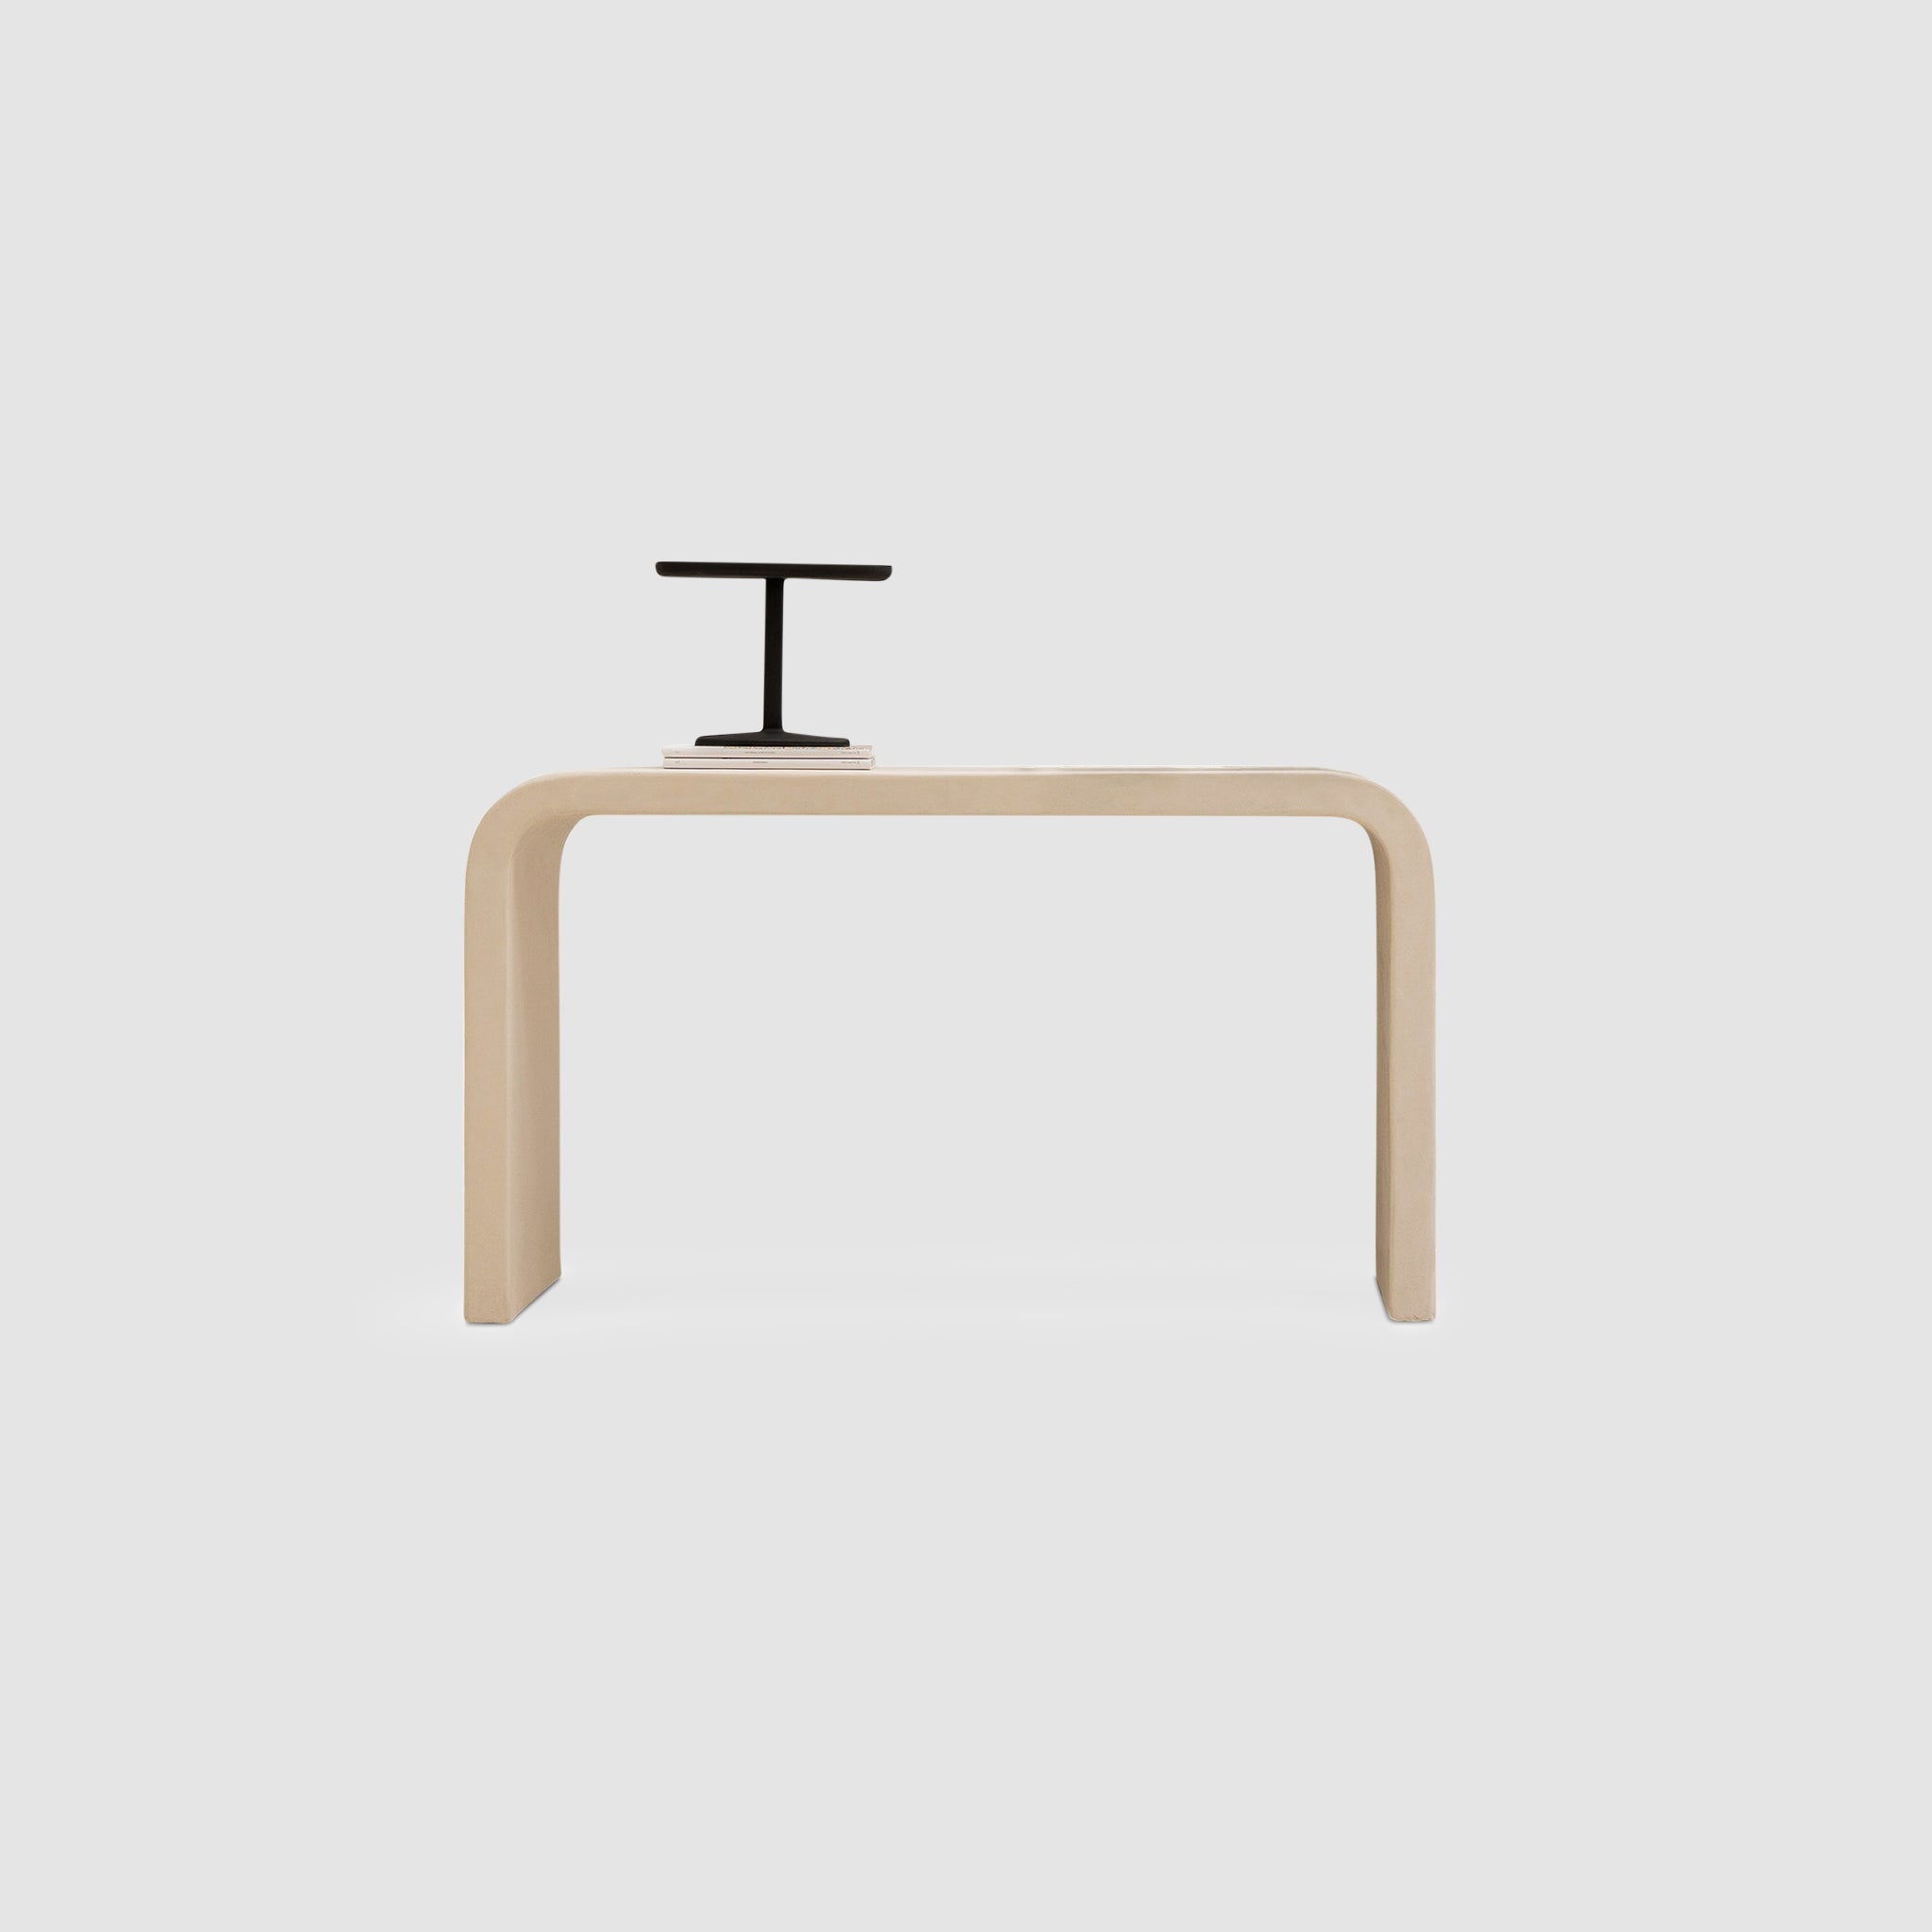 Modern minimalist console table with a sleek, curved design and a black desk accessory.